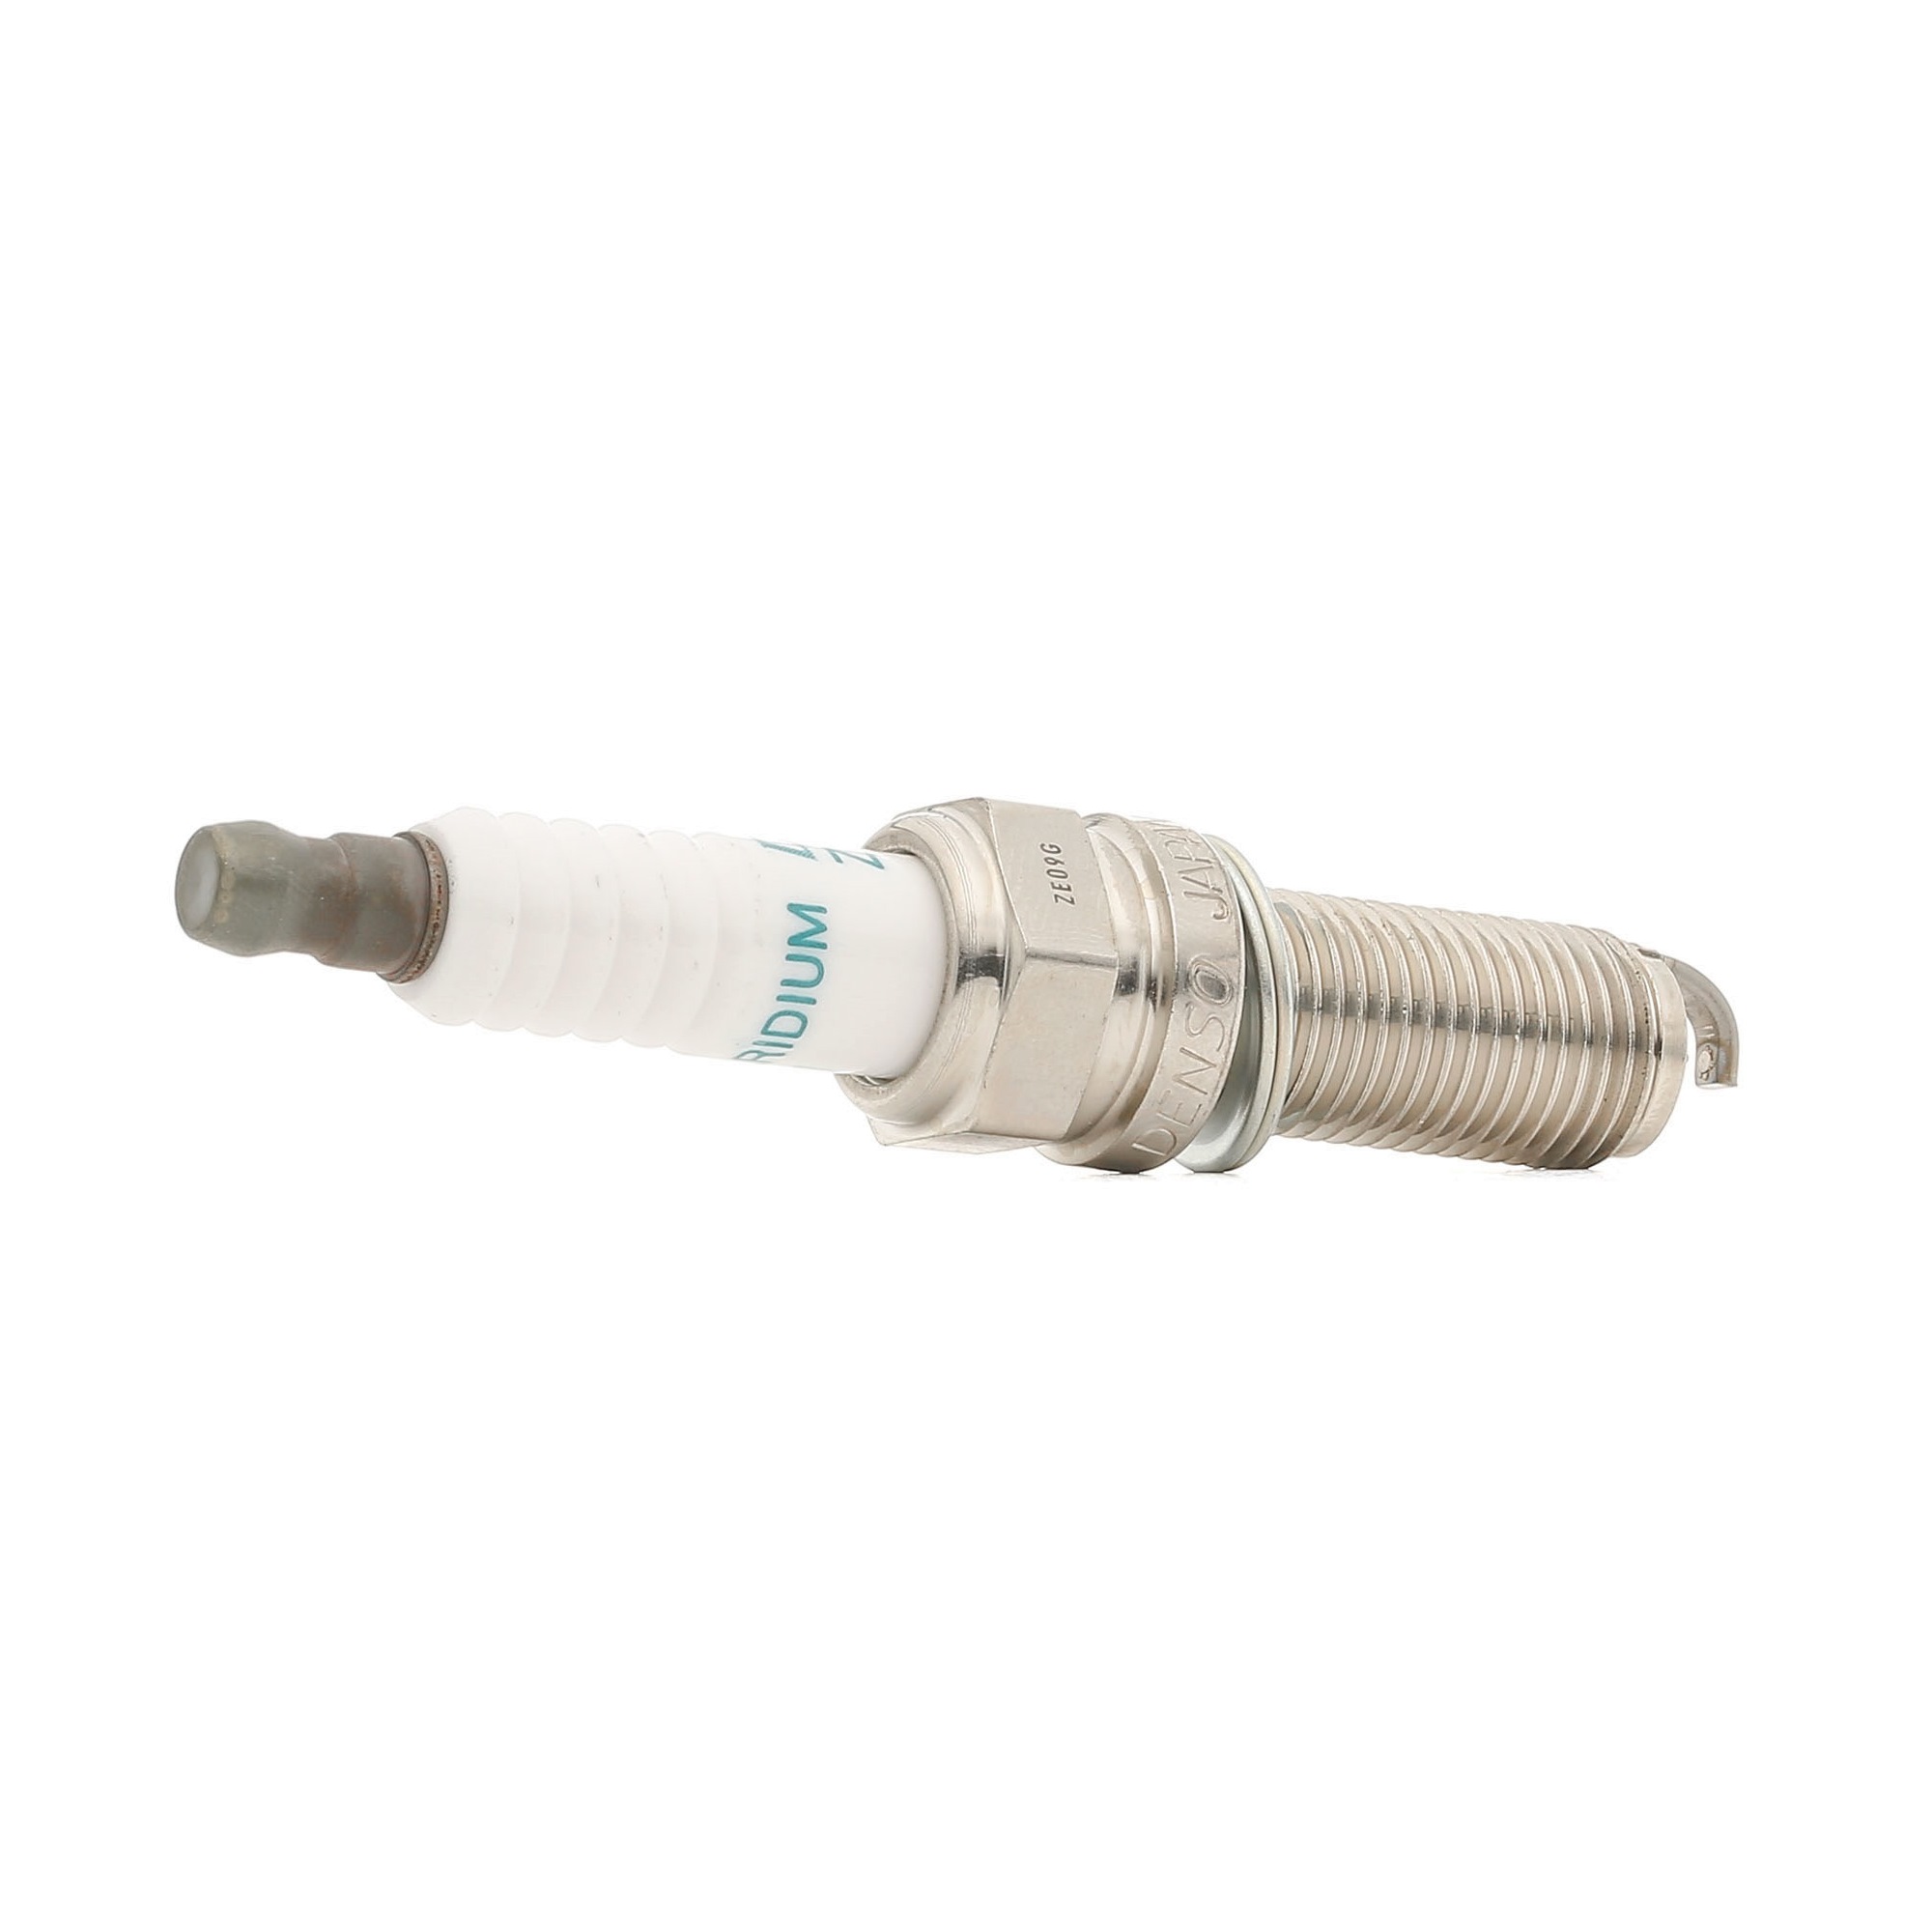 Great value for money - DENSO Spark plug ZXU20HPR11